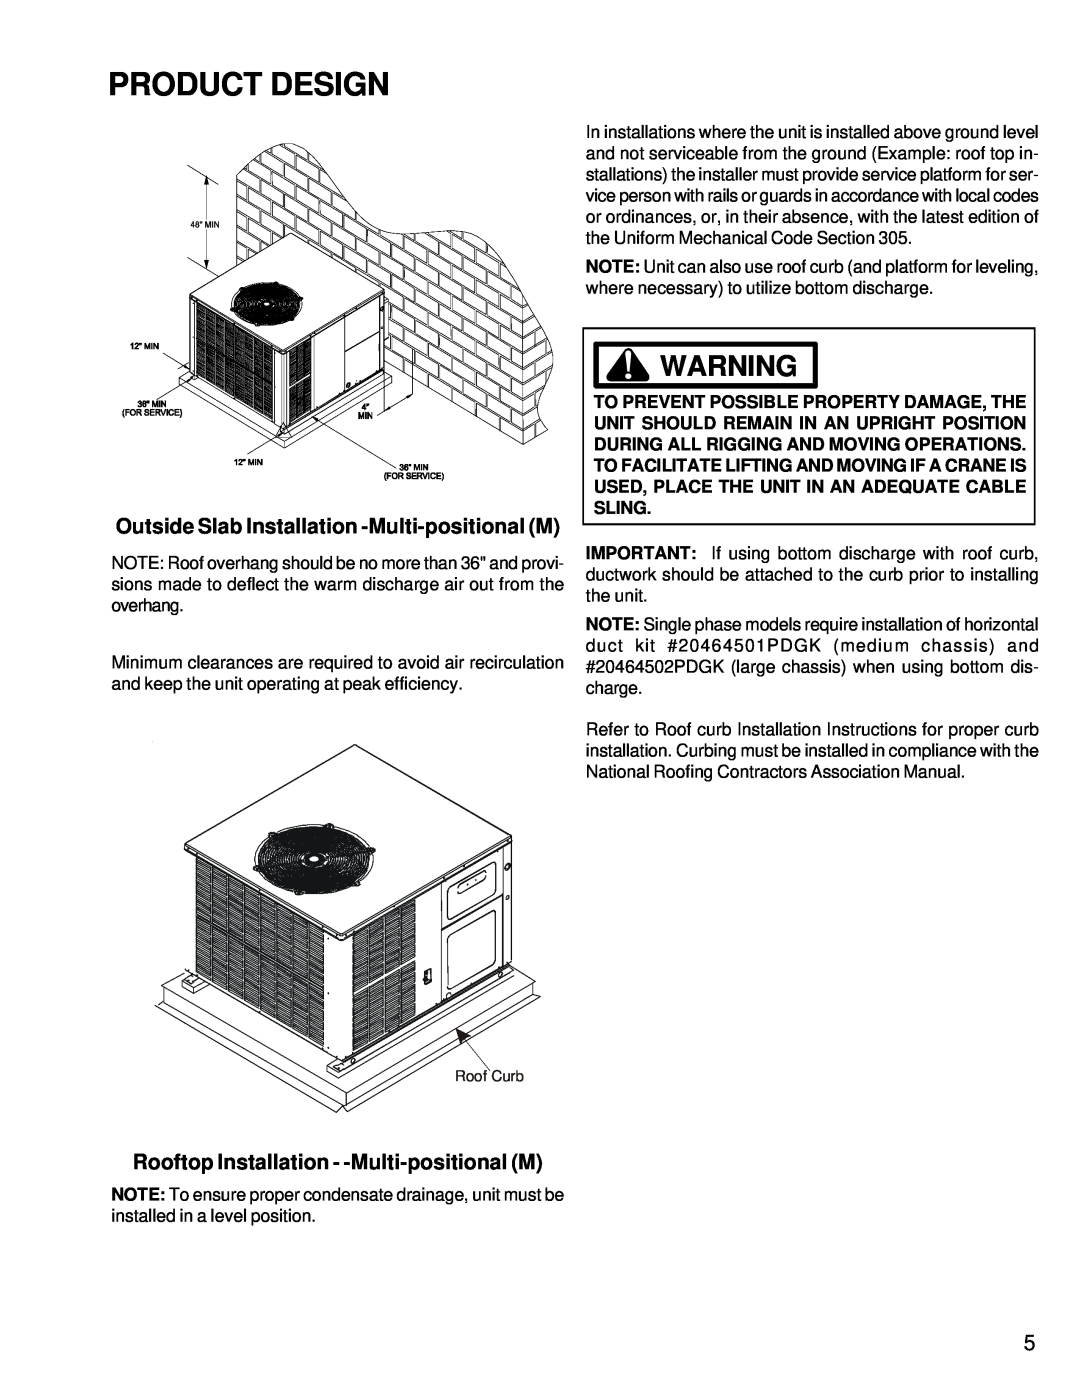 Goodman Mfg RT6332013r1 service manual Product Design, Outside Slab Installation -Multi-positionalM, Roof Curb 